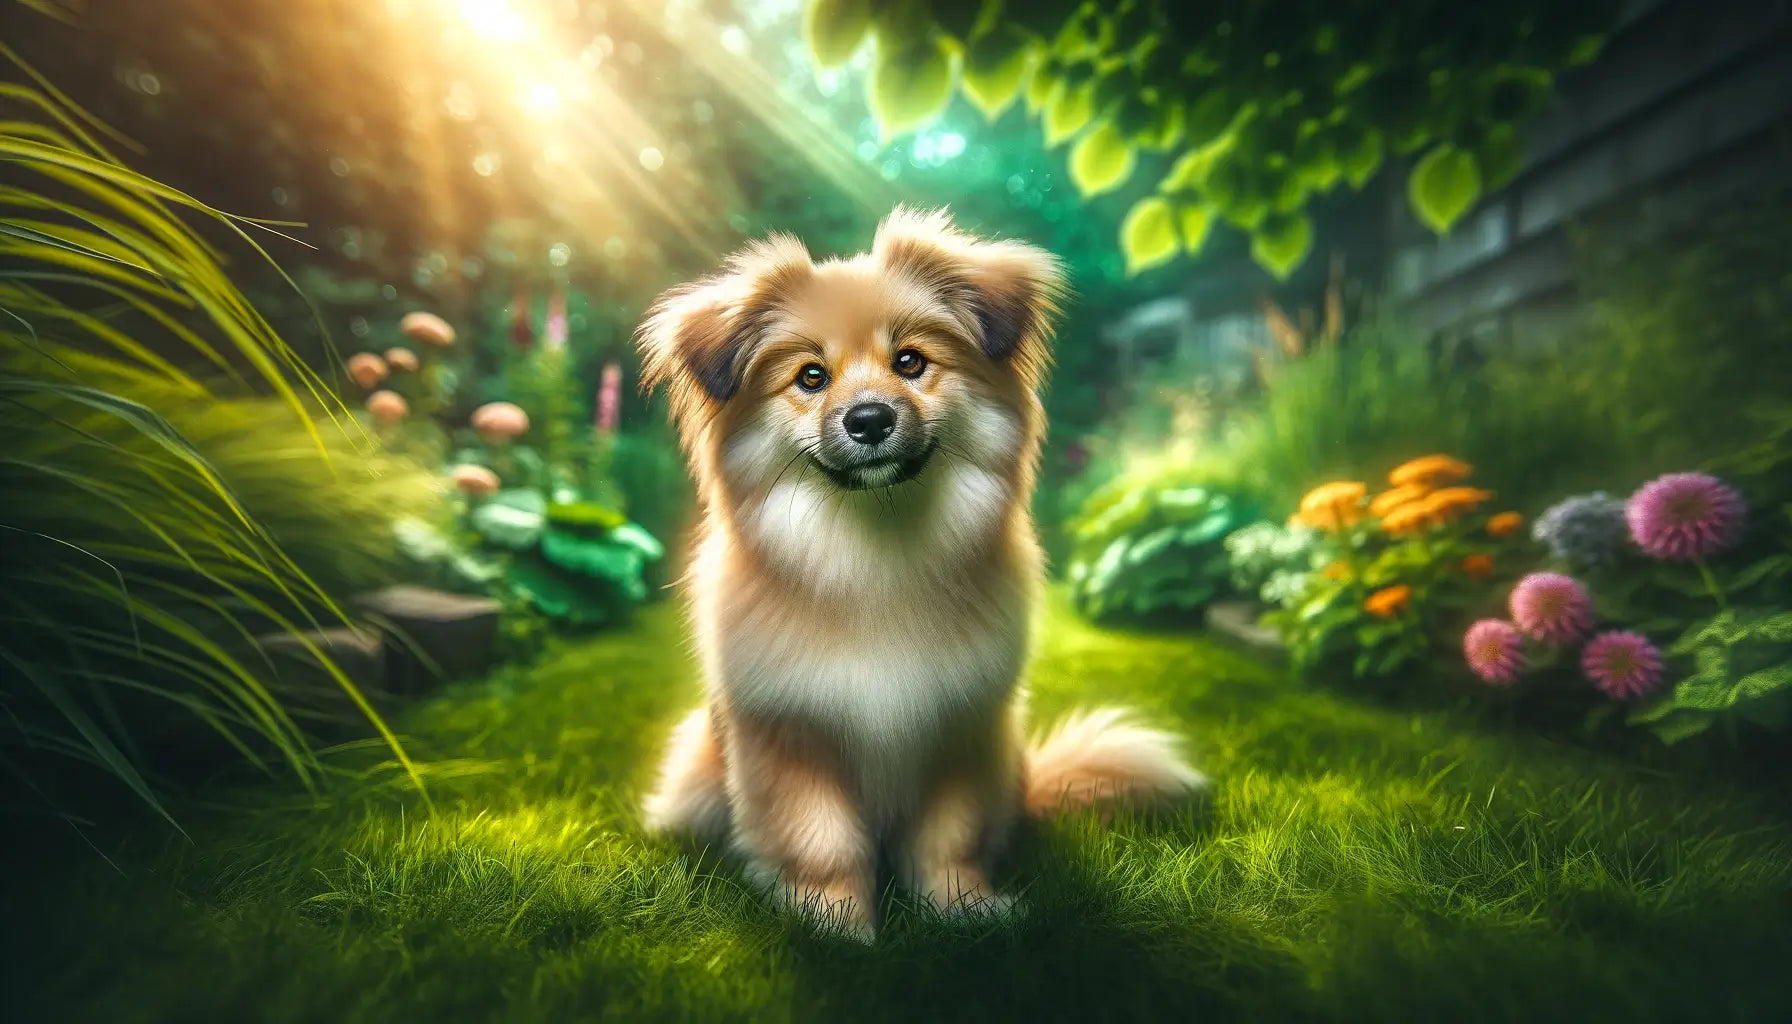 Potcake Dog seated in grass, its playful and curious nature highlighted against the lush greenery.